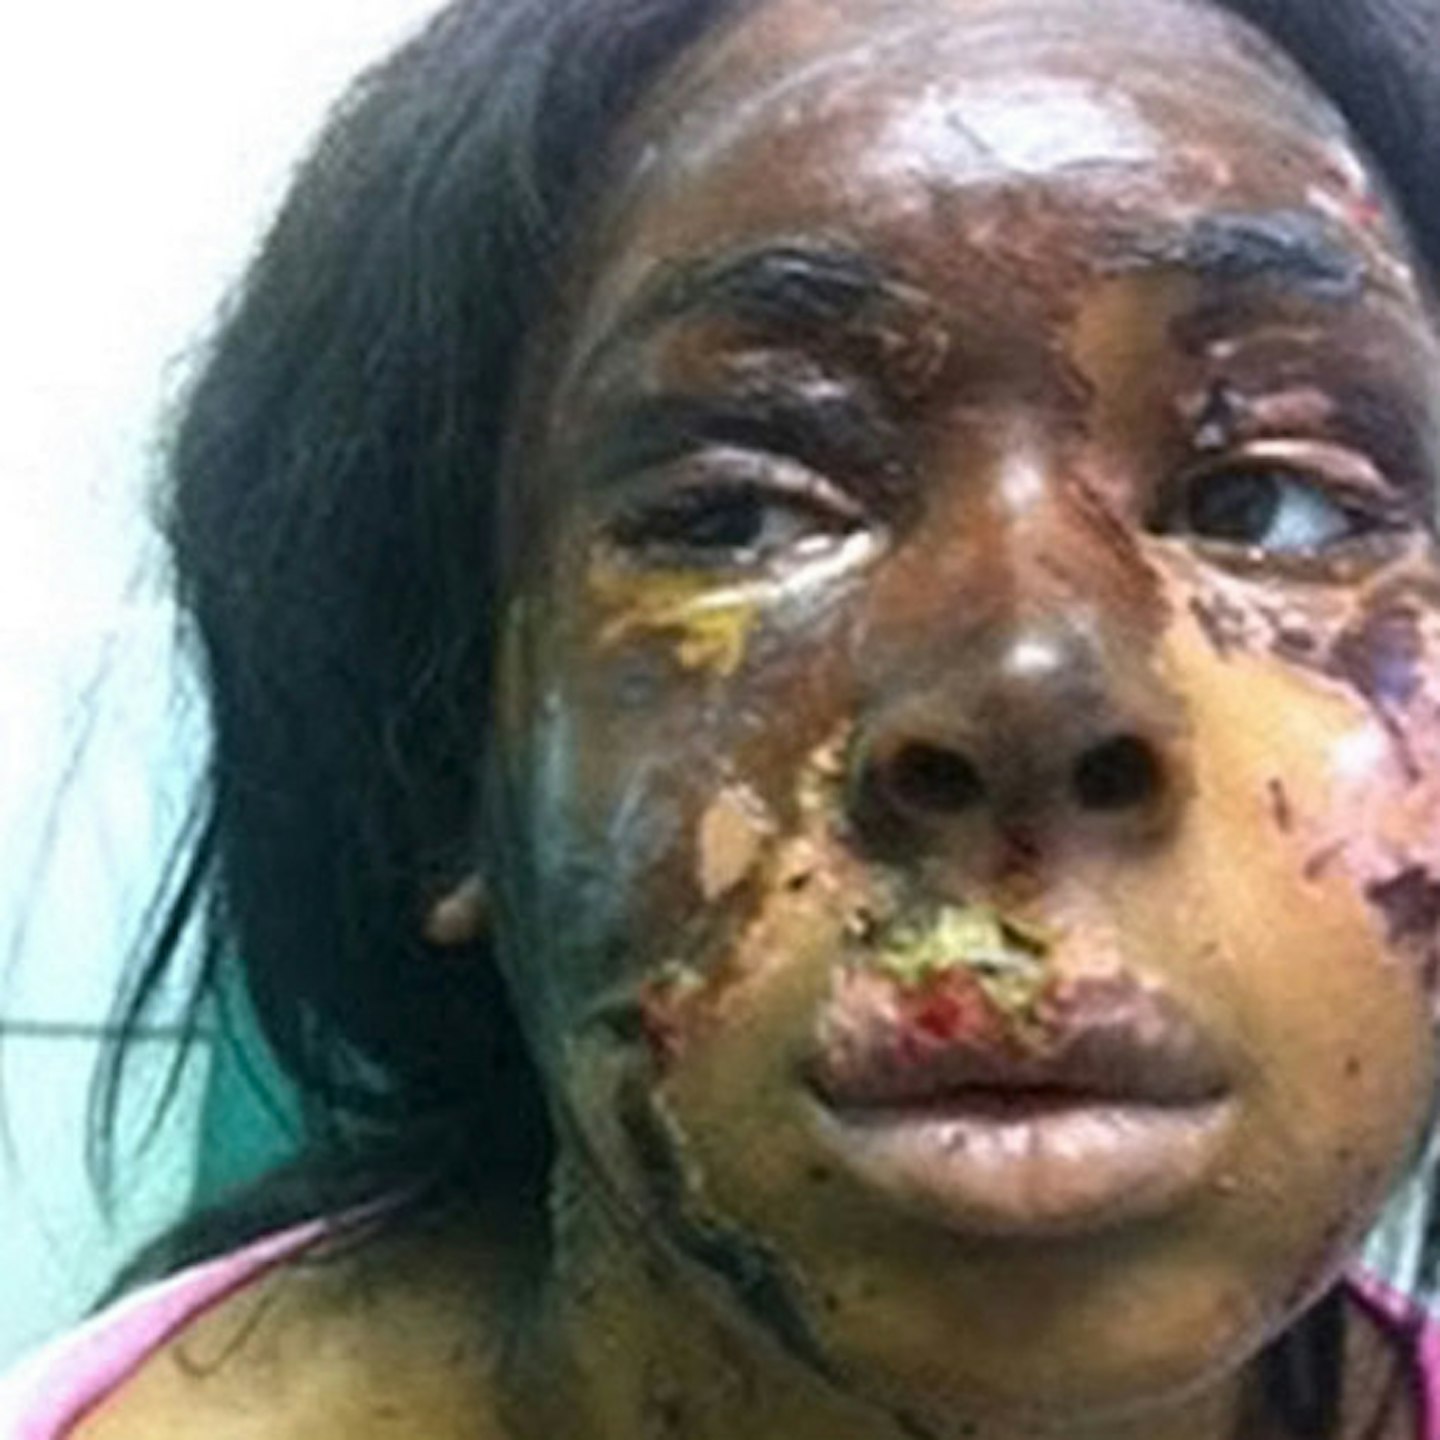 The acid left Naomi with horrific burns to her face, chest and neck